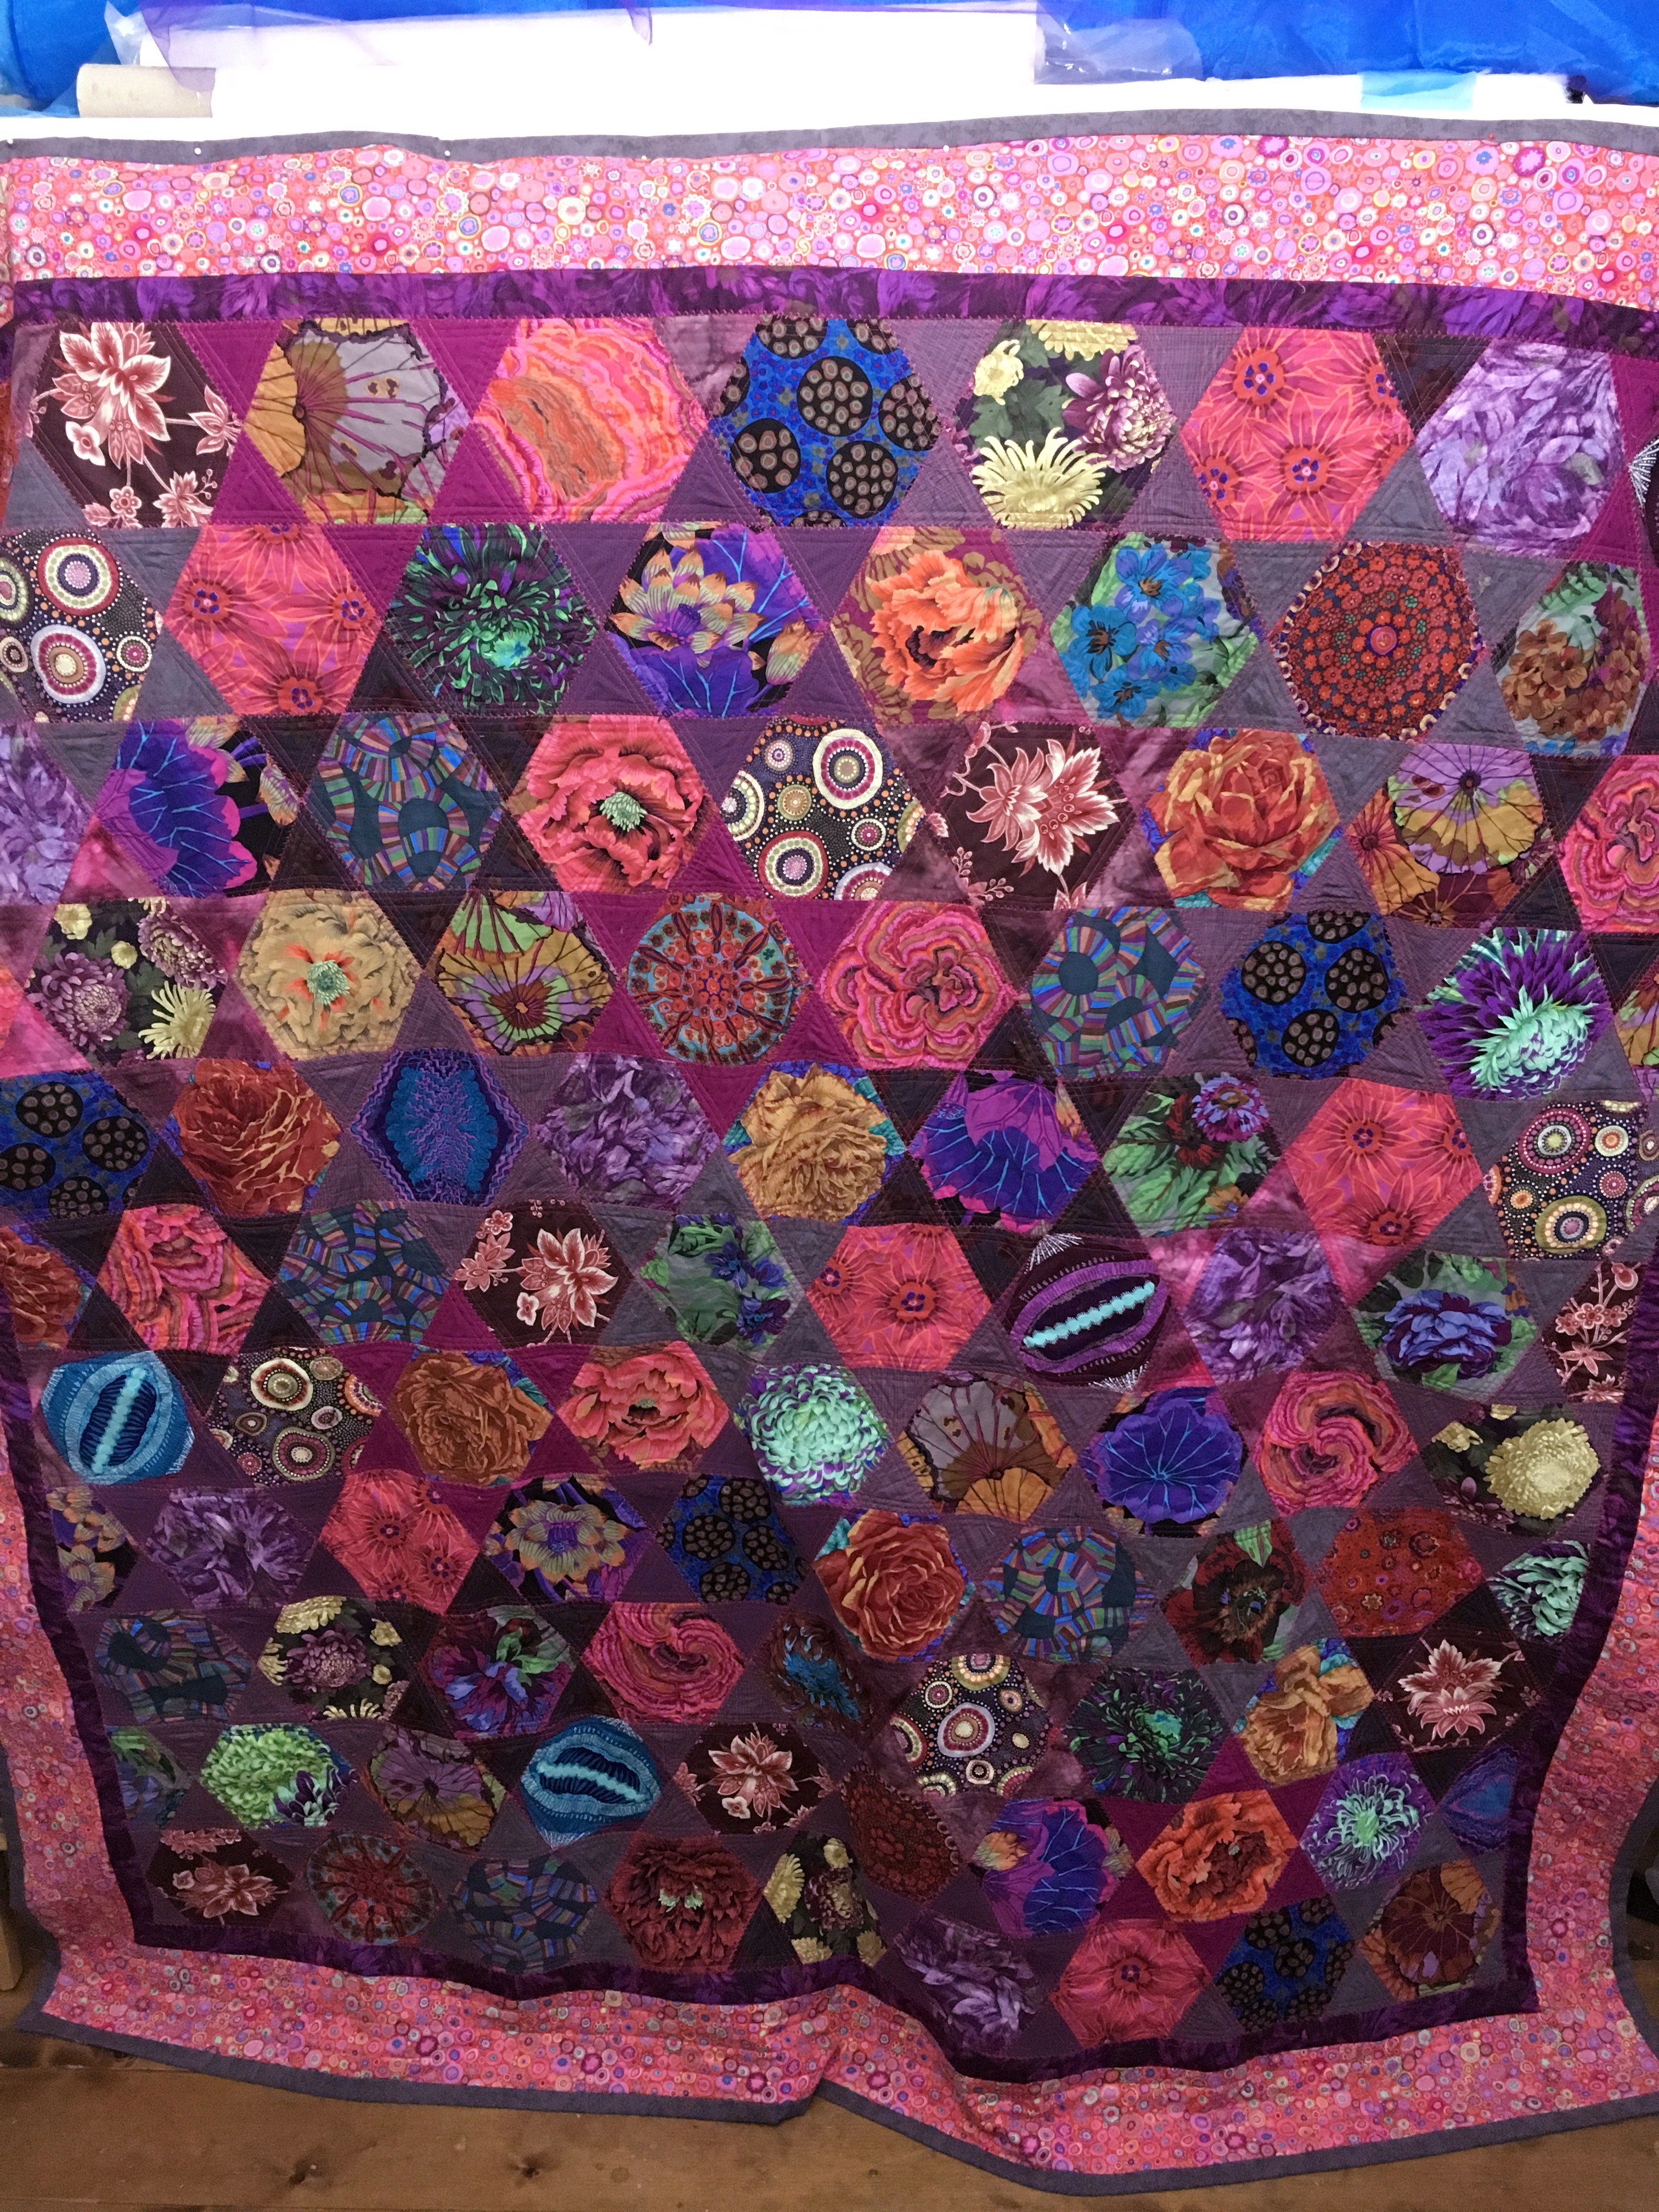 completed Kaffe Fassett quilt by Gill Roberts